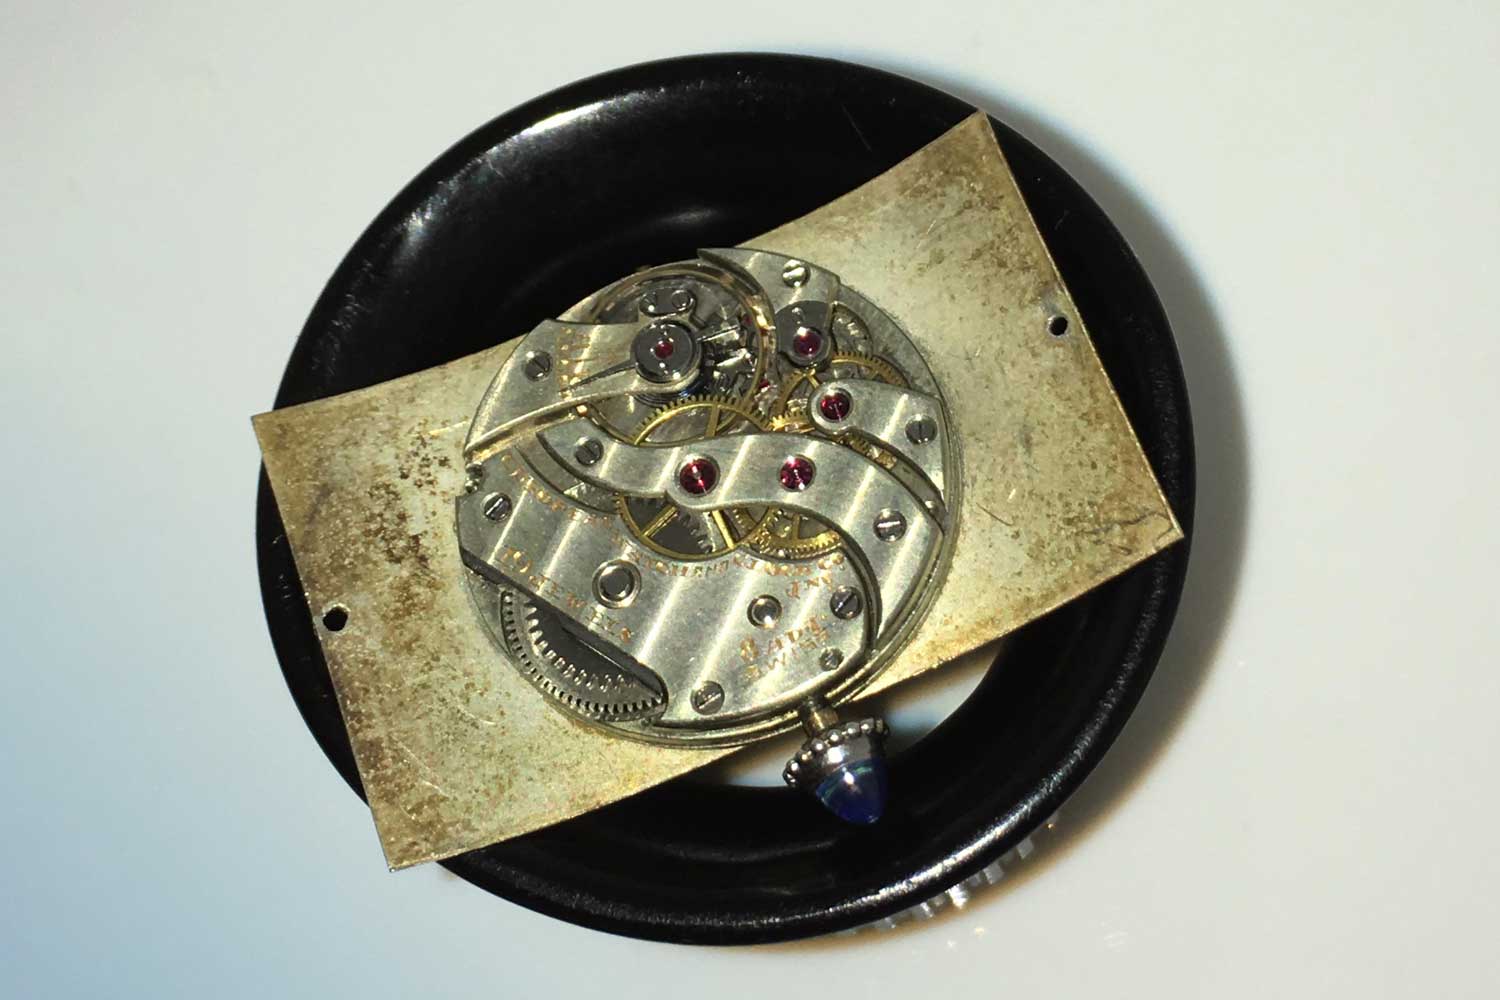 The underside of the circa 1930s Tank Cintrée showing how the movement is placed in the recess of the curve of the watch's dial © bonhams.com